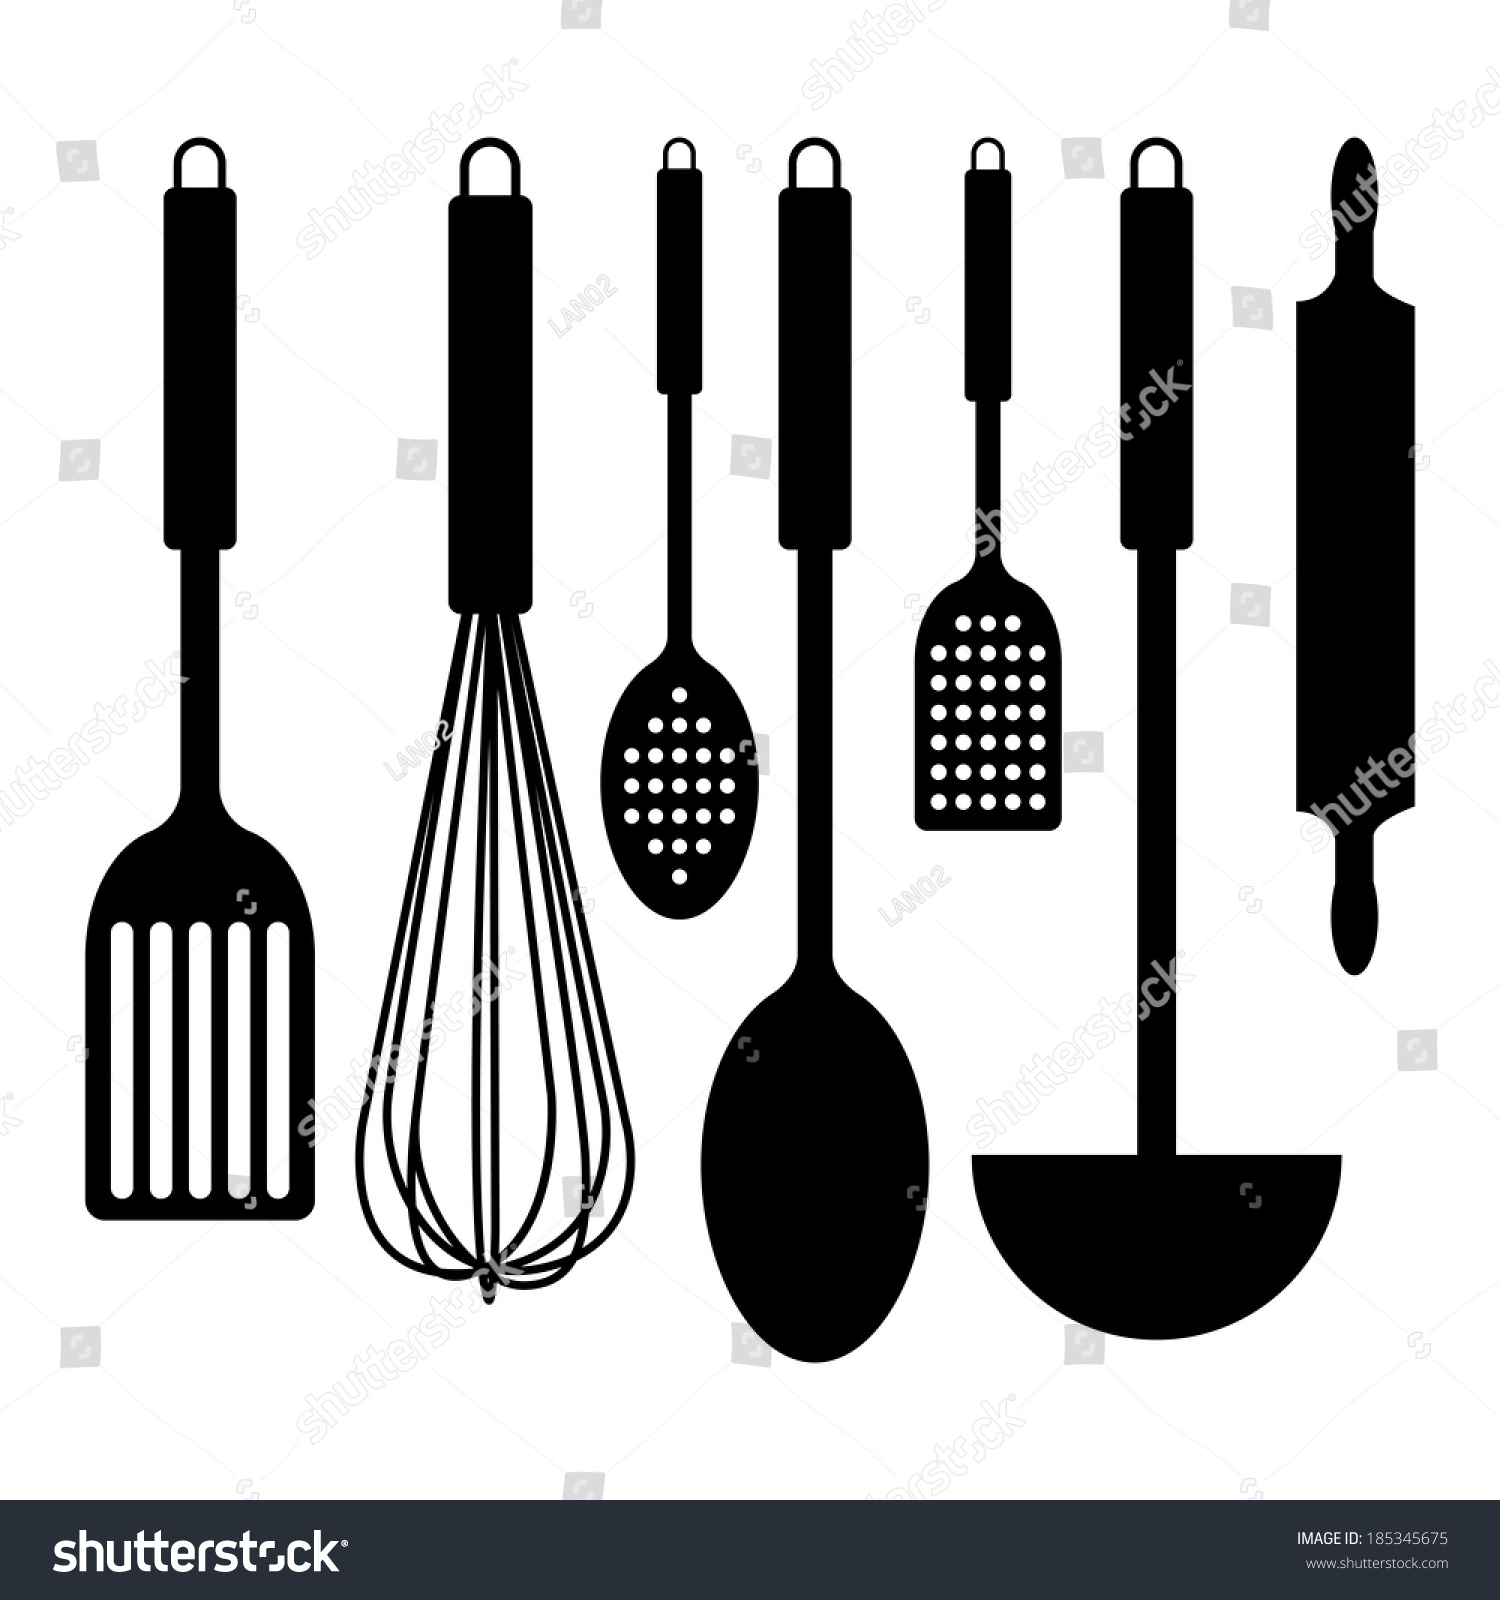 Abstract Kitchen Tools Silhouettes On White Stock Vector (Royalty Free ...